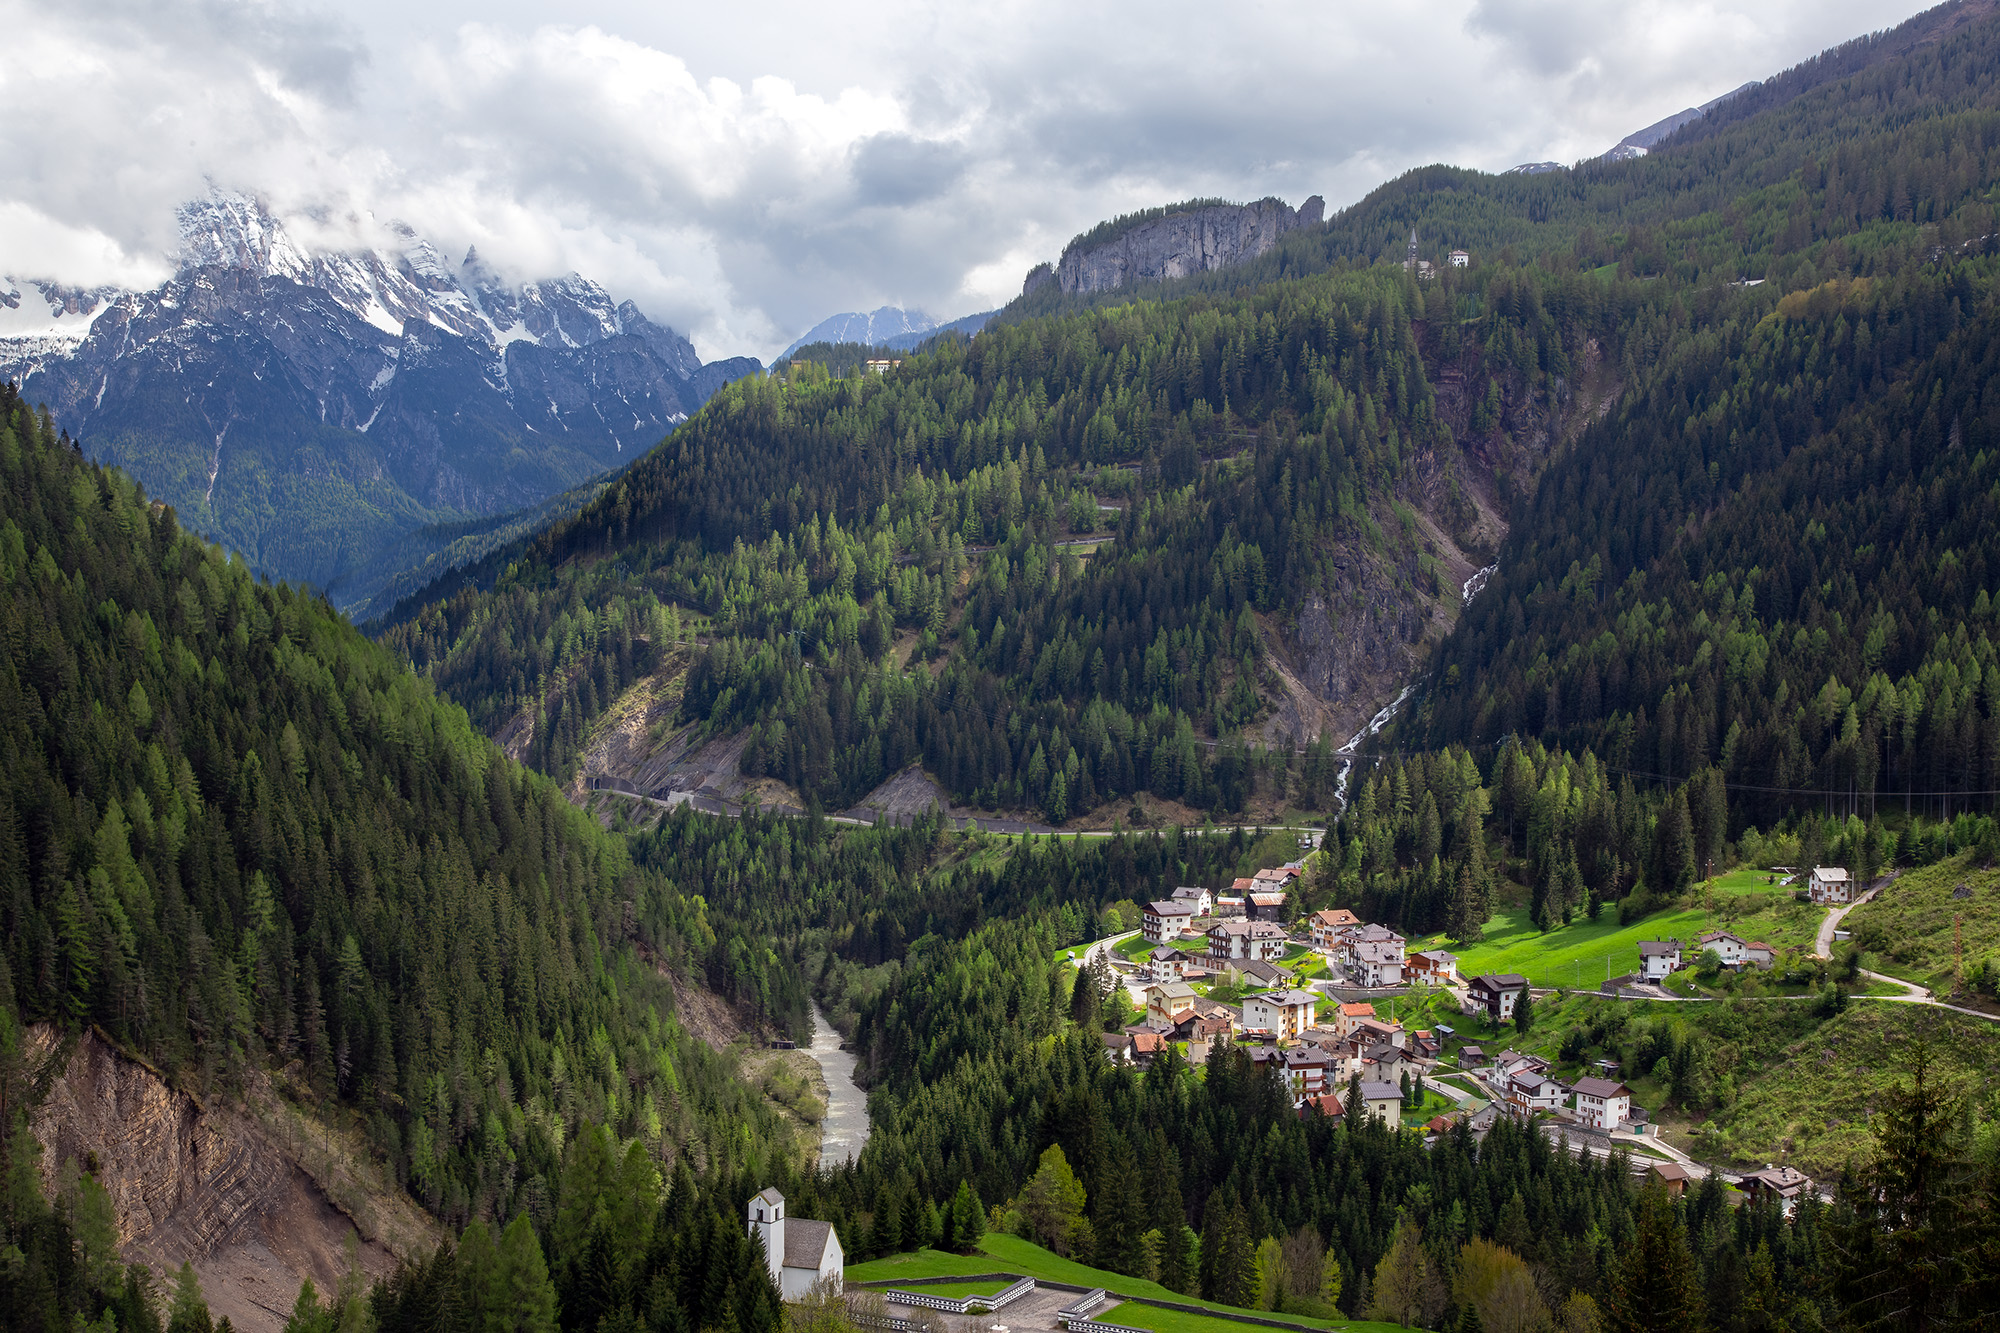 High above the Italian Dolomites, this image frames the town of Tusele against a backdrop of nature's might. The village nestles...